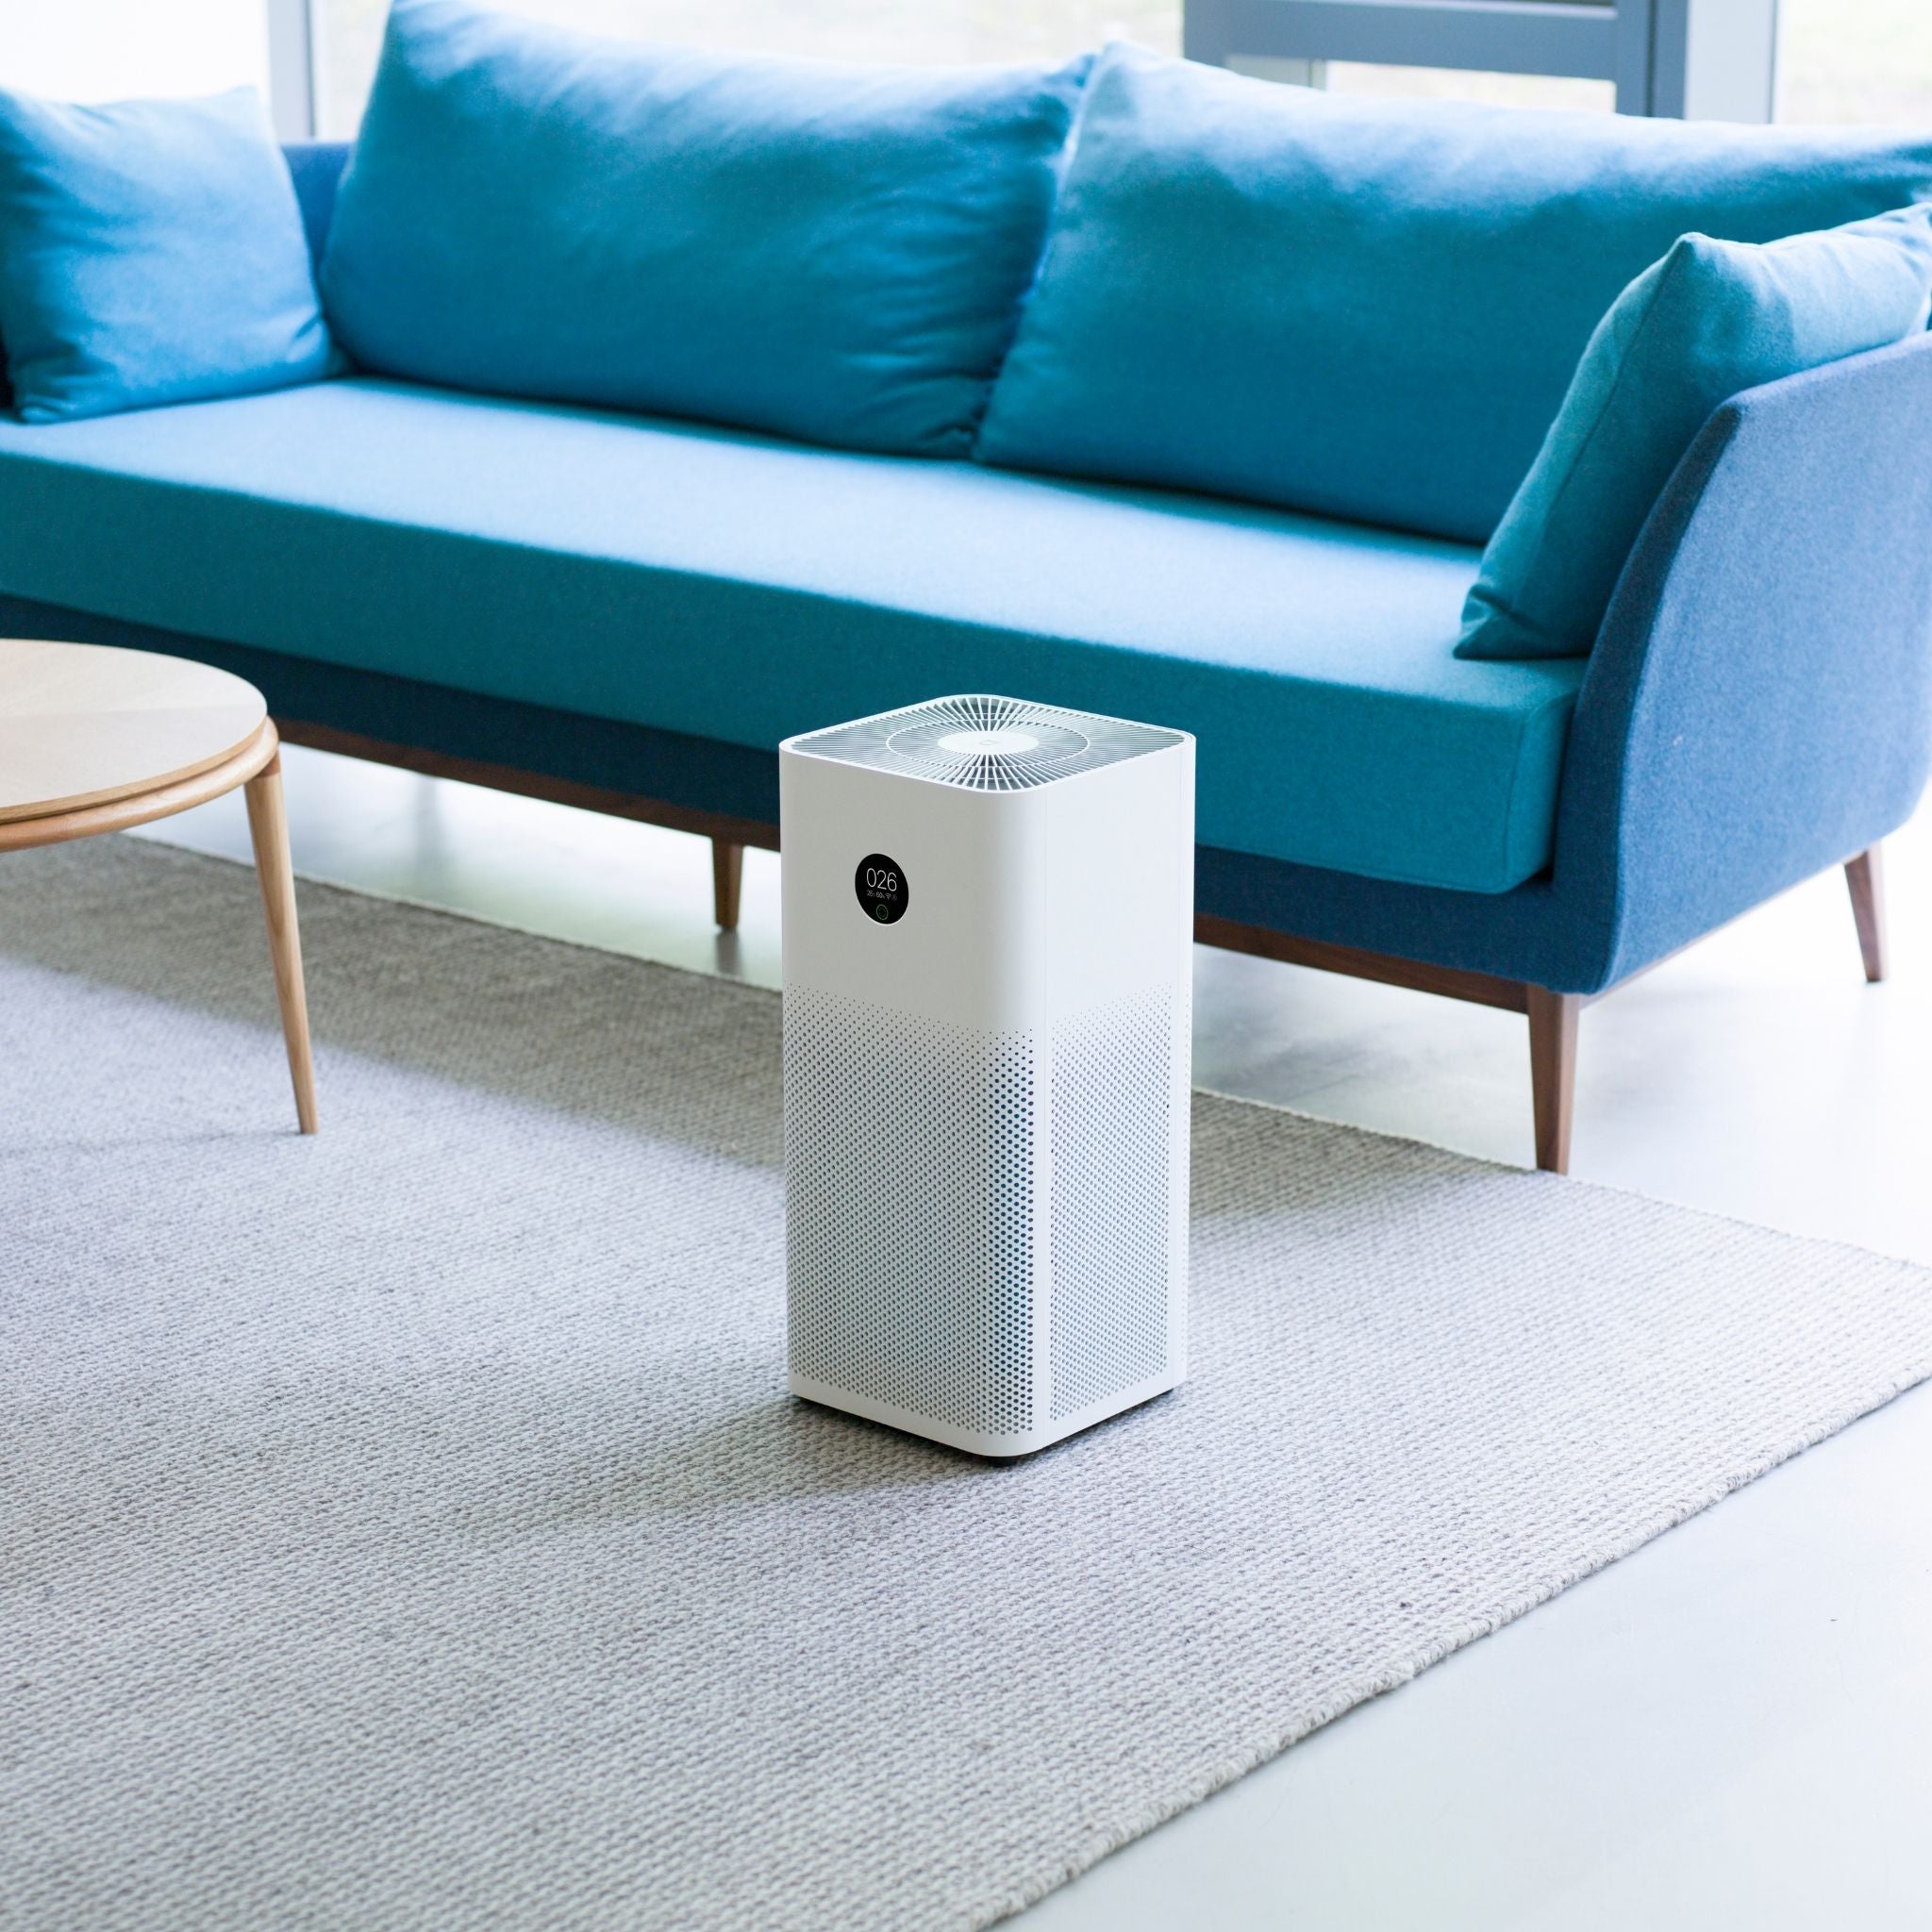  Xiaomi Air Purifiers,High Efficiency Filter Air Purifiers for  Home Large Room up to 409 sqft,Quiet,Intelligent Control and LED Display Air  Filter for 99.97% Hairs, Dust, Smoke,Mi Air Purifier 3C1 : Home